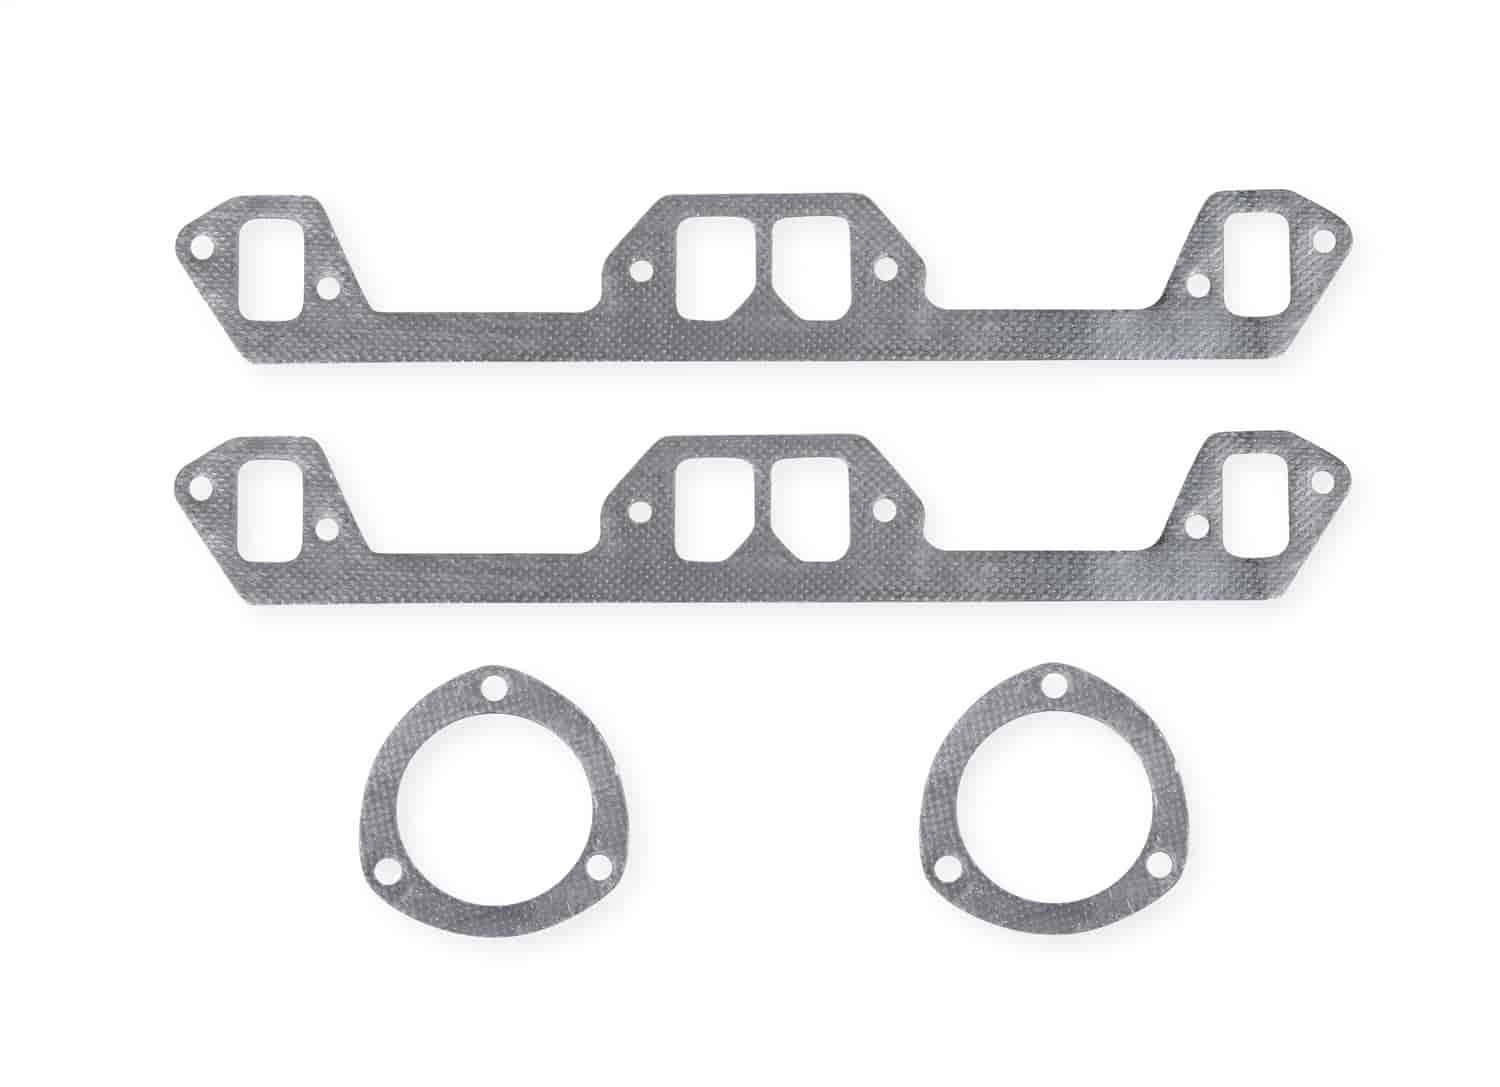 Header Replacement Gasket Set Small Block Chrysler Includes 3" Collector Gaskets